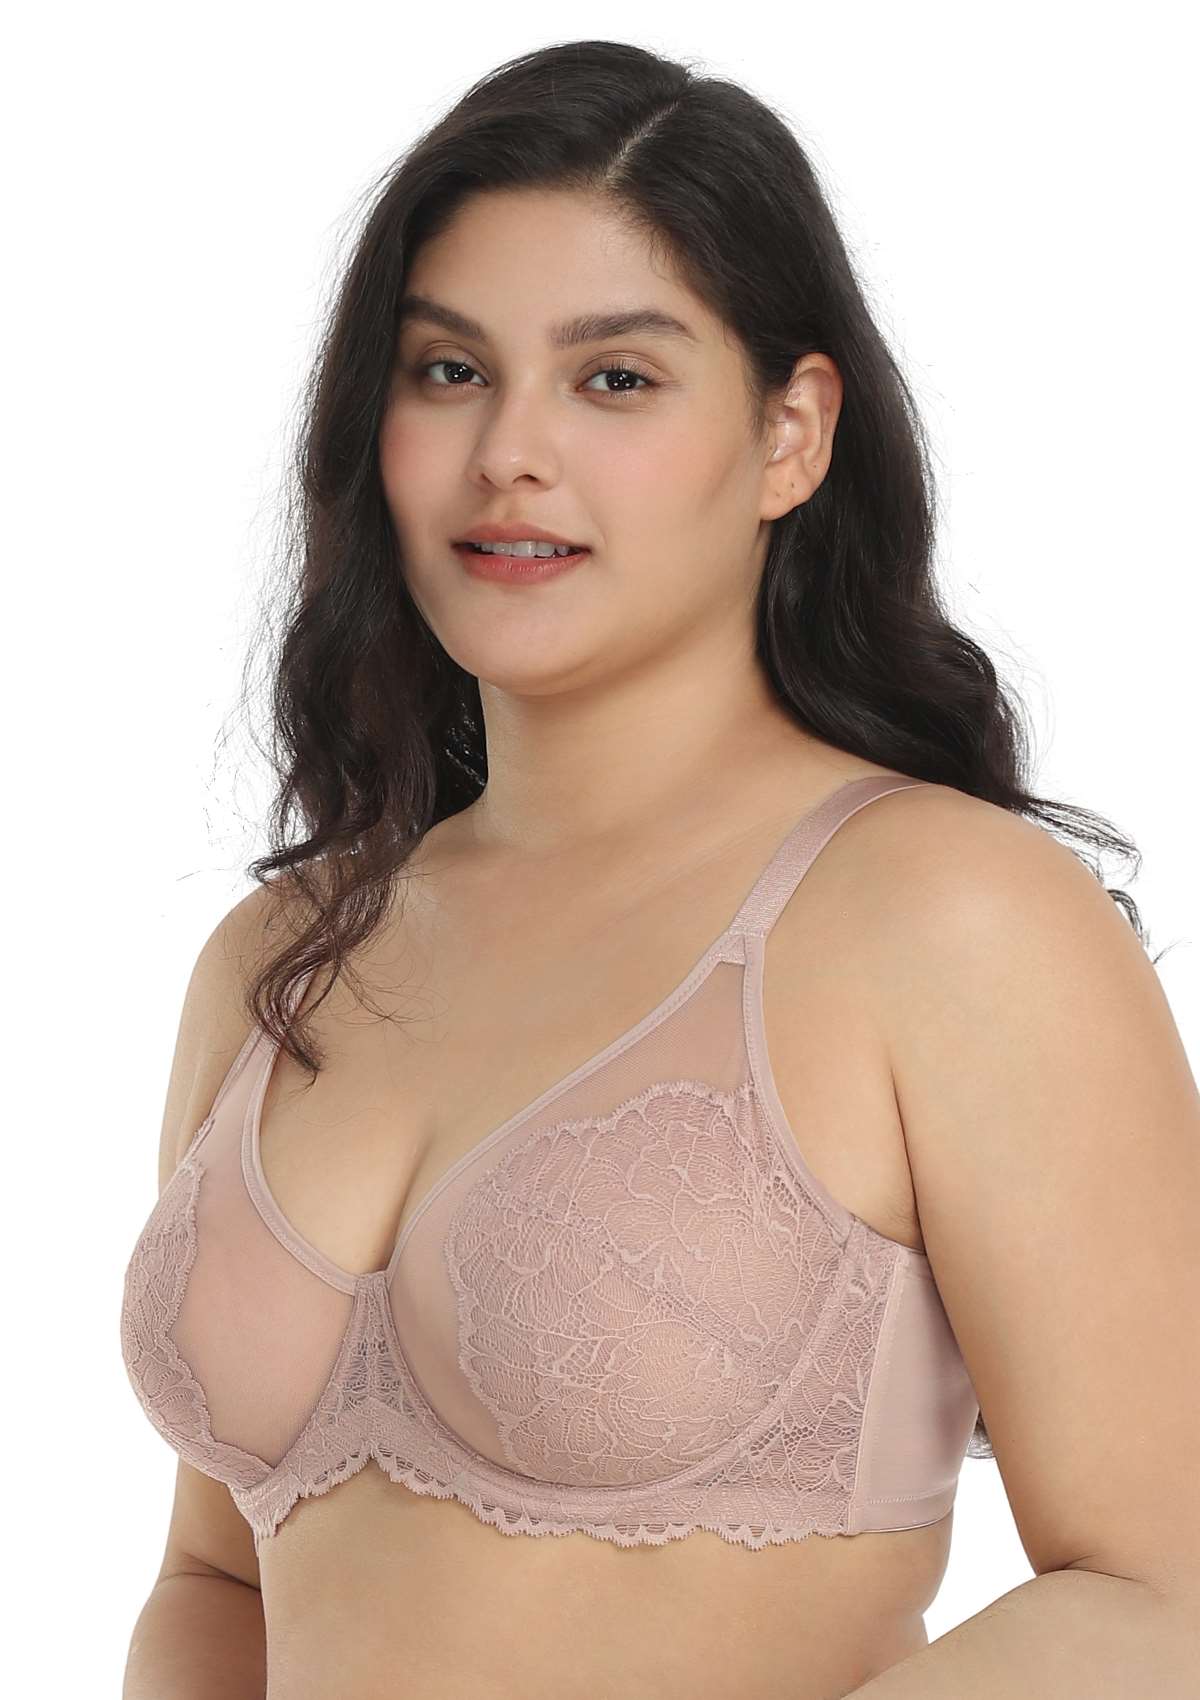 HSIA Blossom Lace Bra And Panties Set: Best Bra For Large Busts - Dark Pink / 38 / I